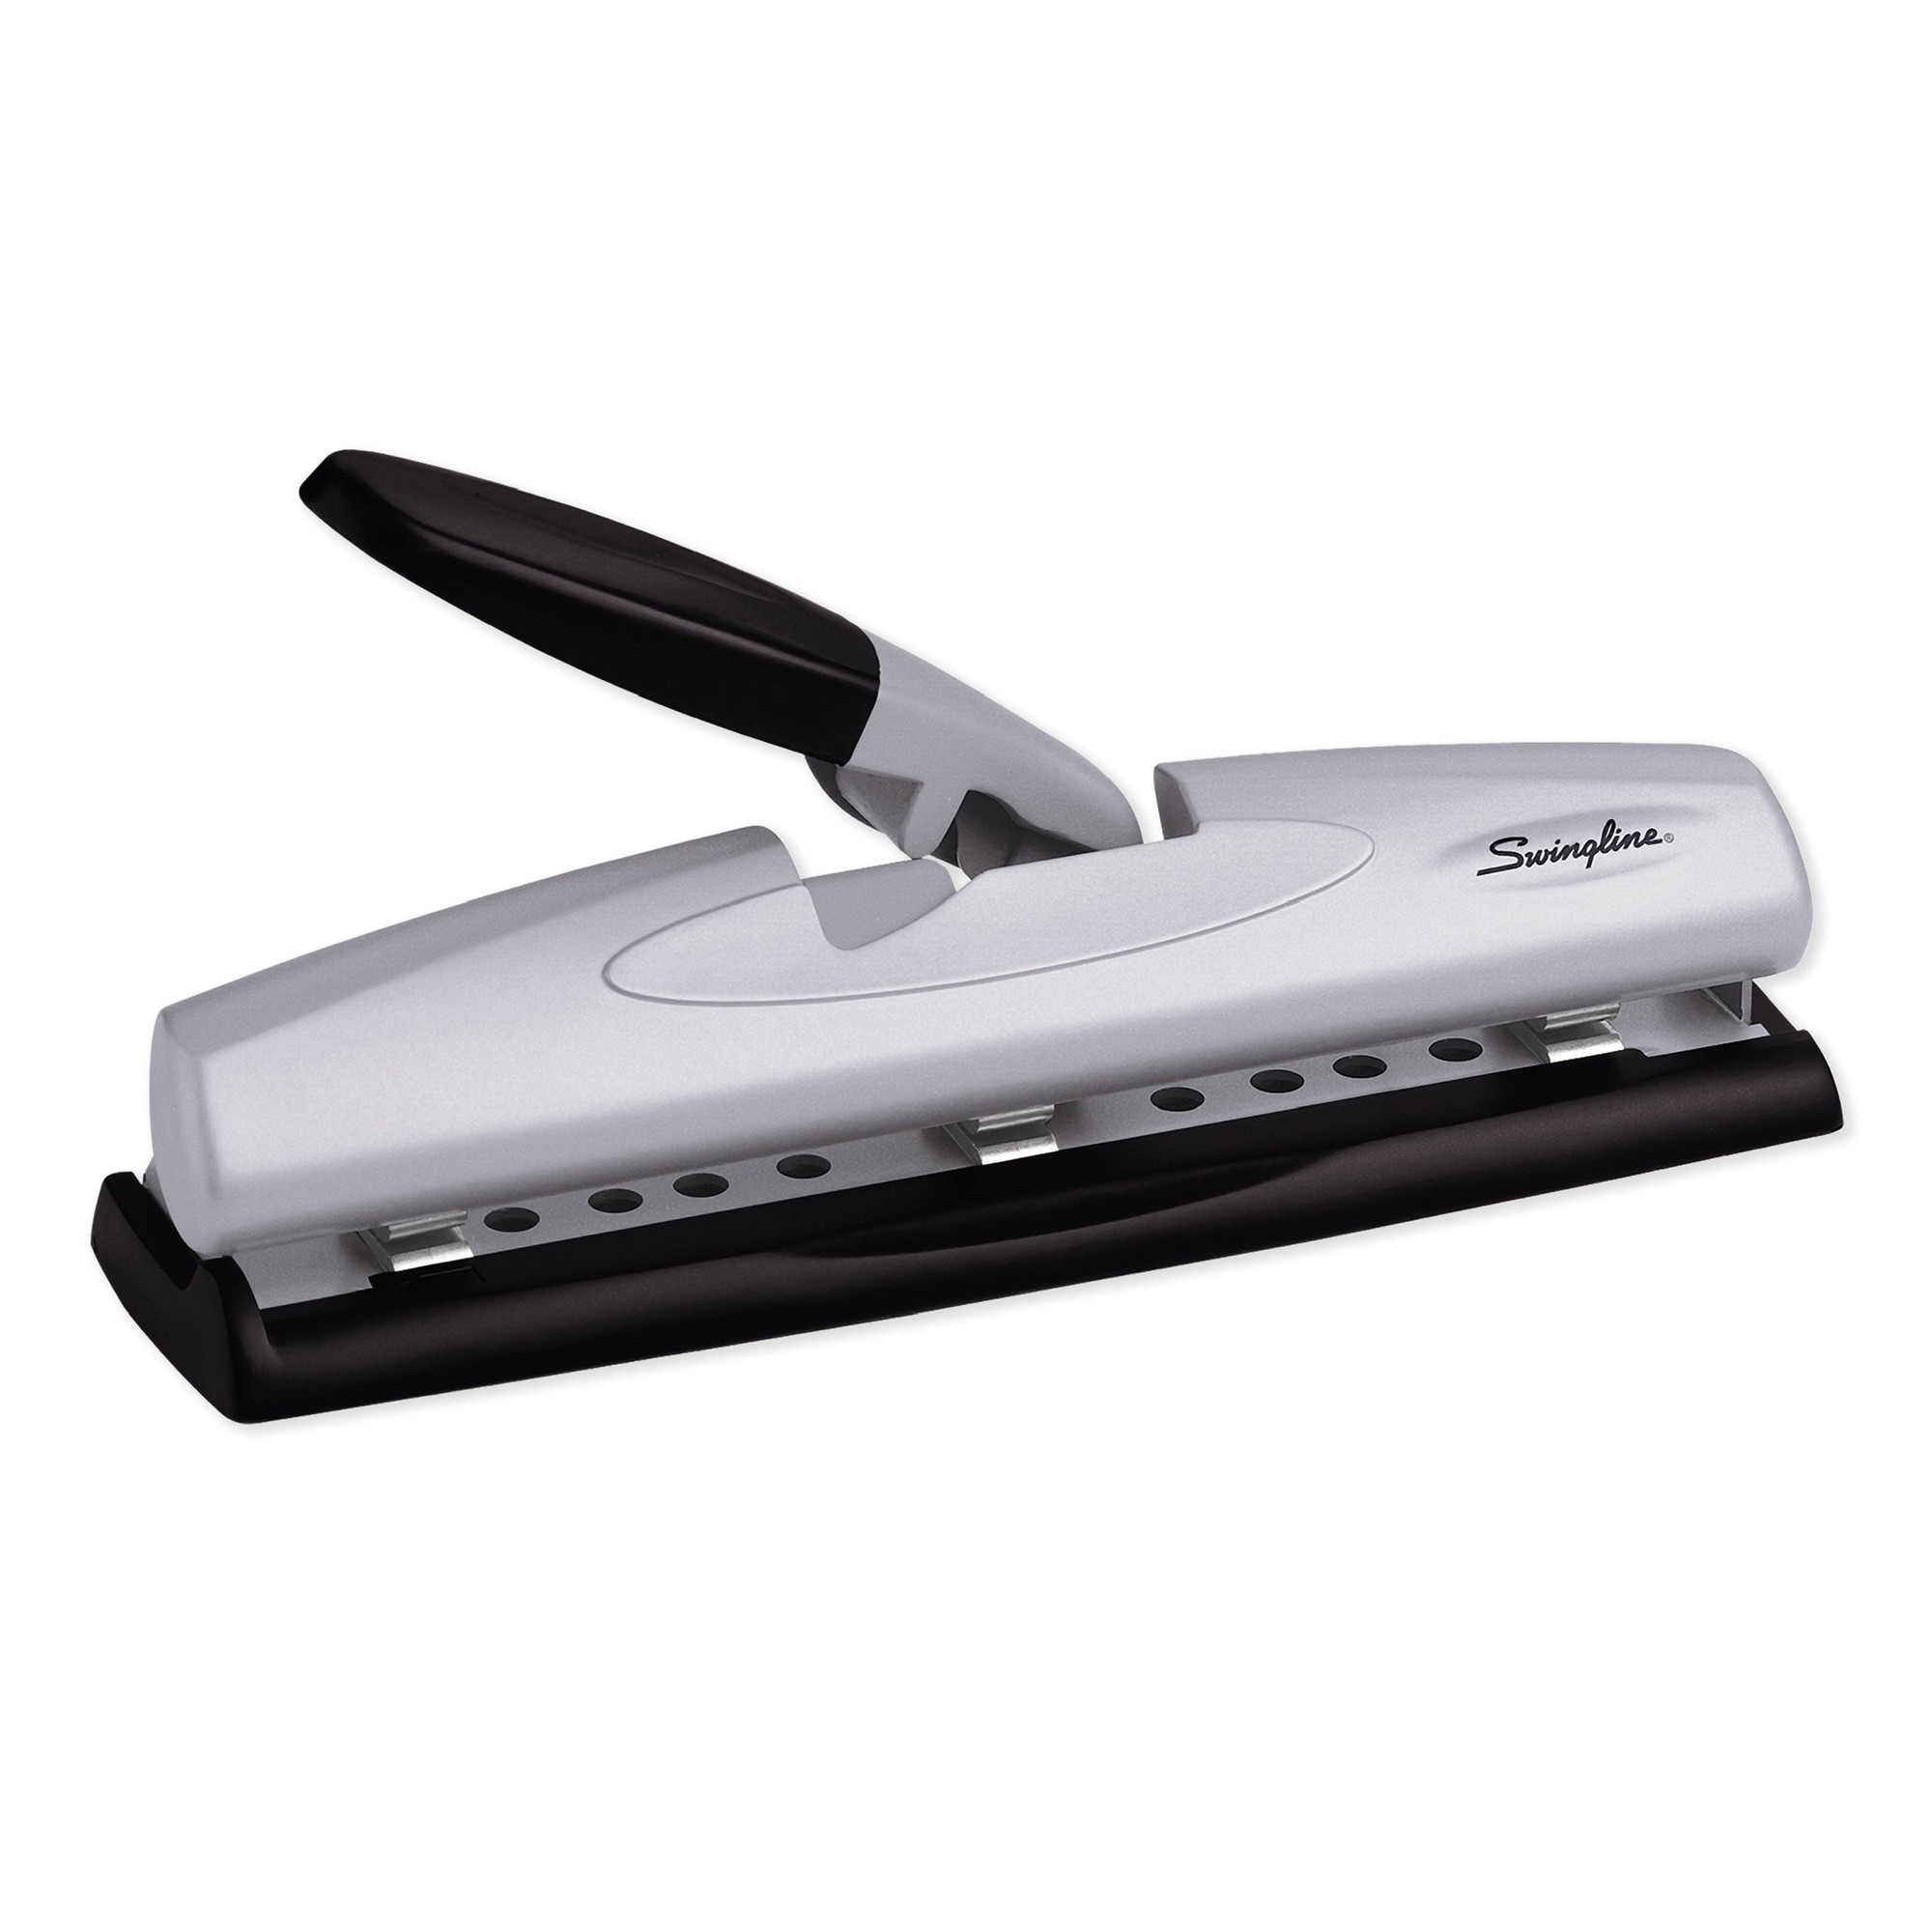 12-Sheet LightTouch Desktop Two-to-Three-Hole Punch, 9/32" Holes, Black/Silver